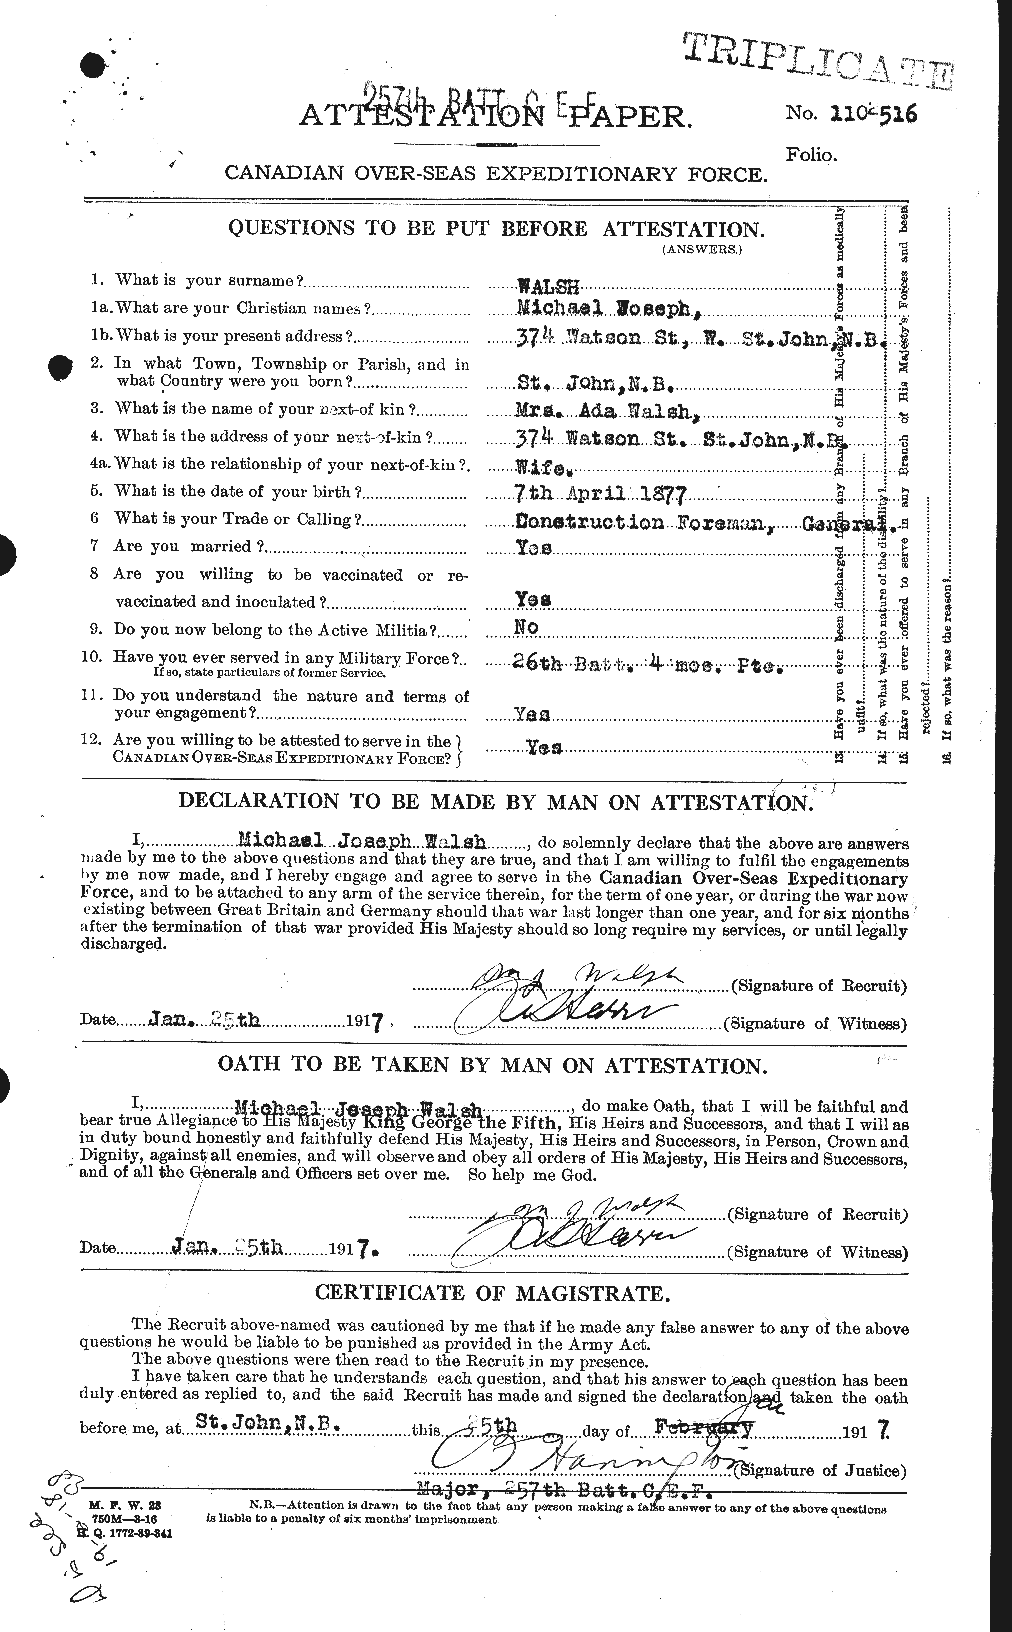 Personnel Records of the First World War - CEF 653446a